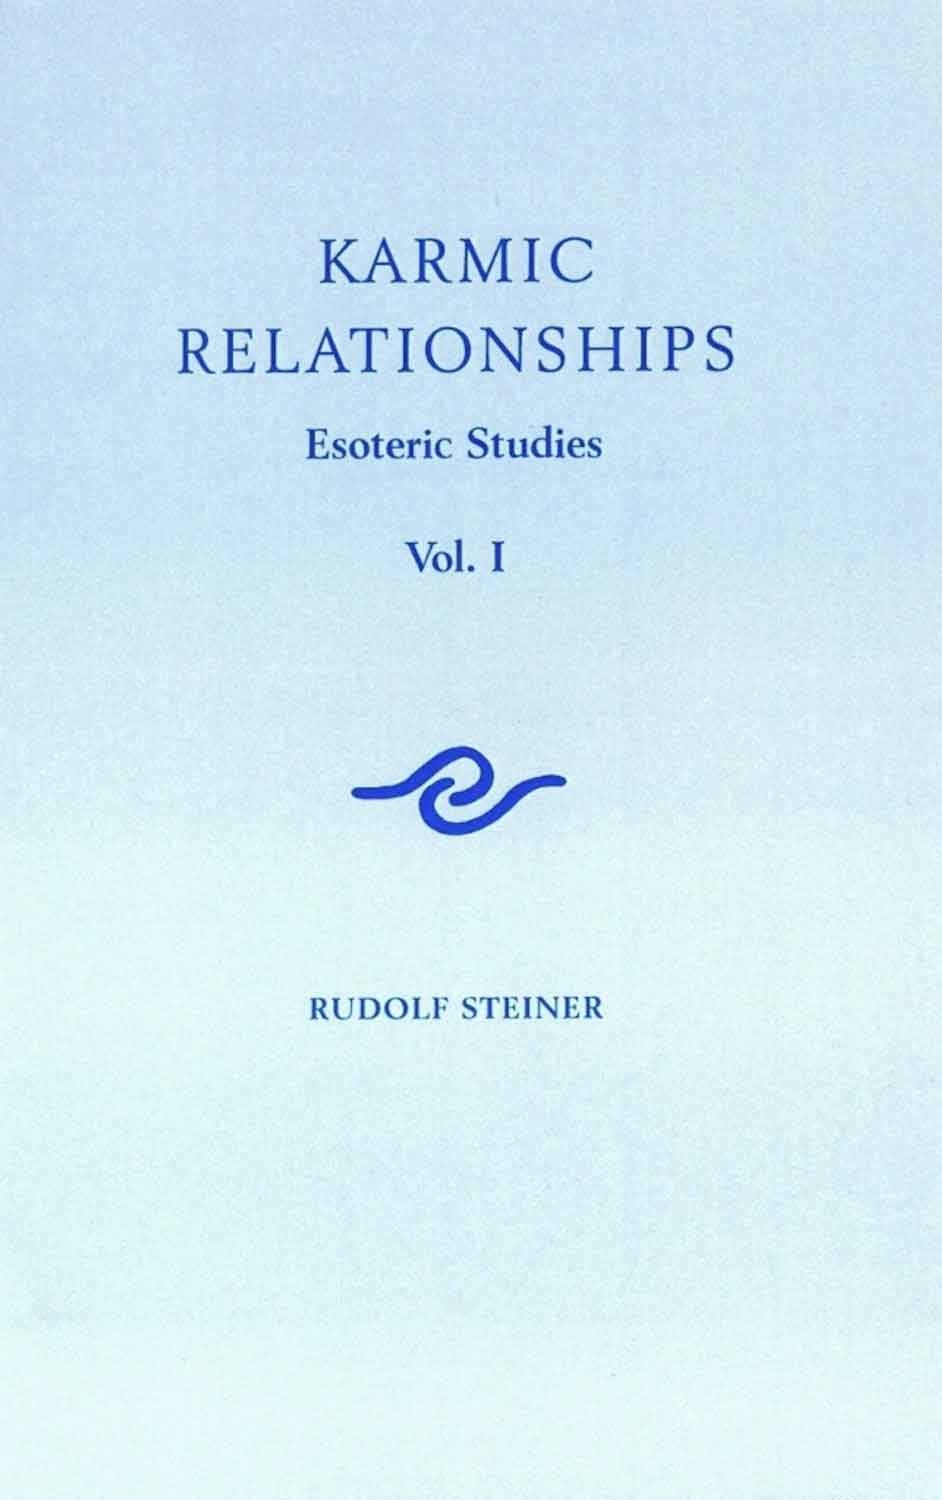 Episode 55: Lecture 55: Karmic Relationships given on July 11 1924 by Rudolf Steiner